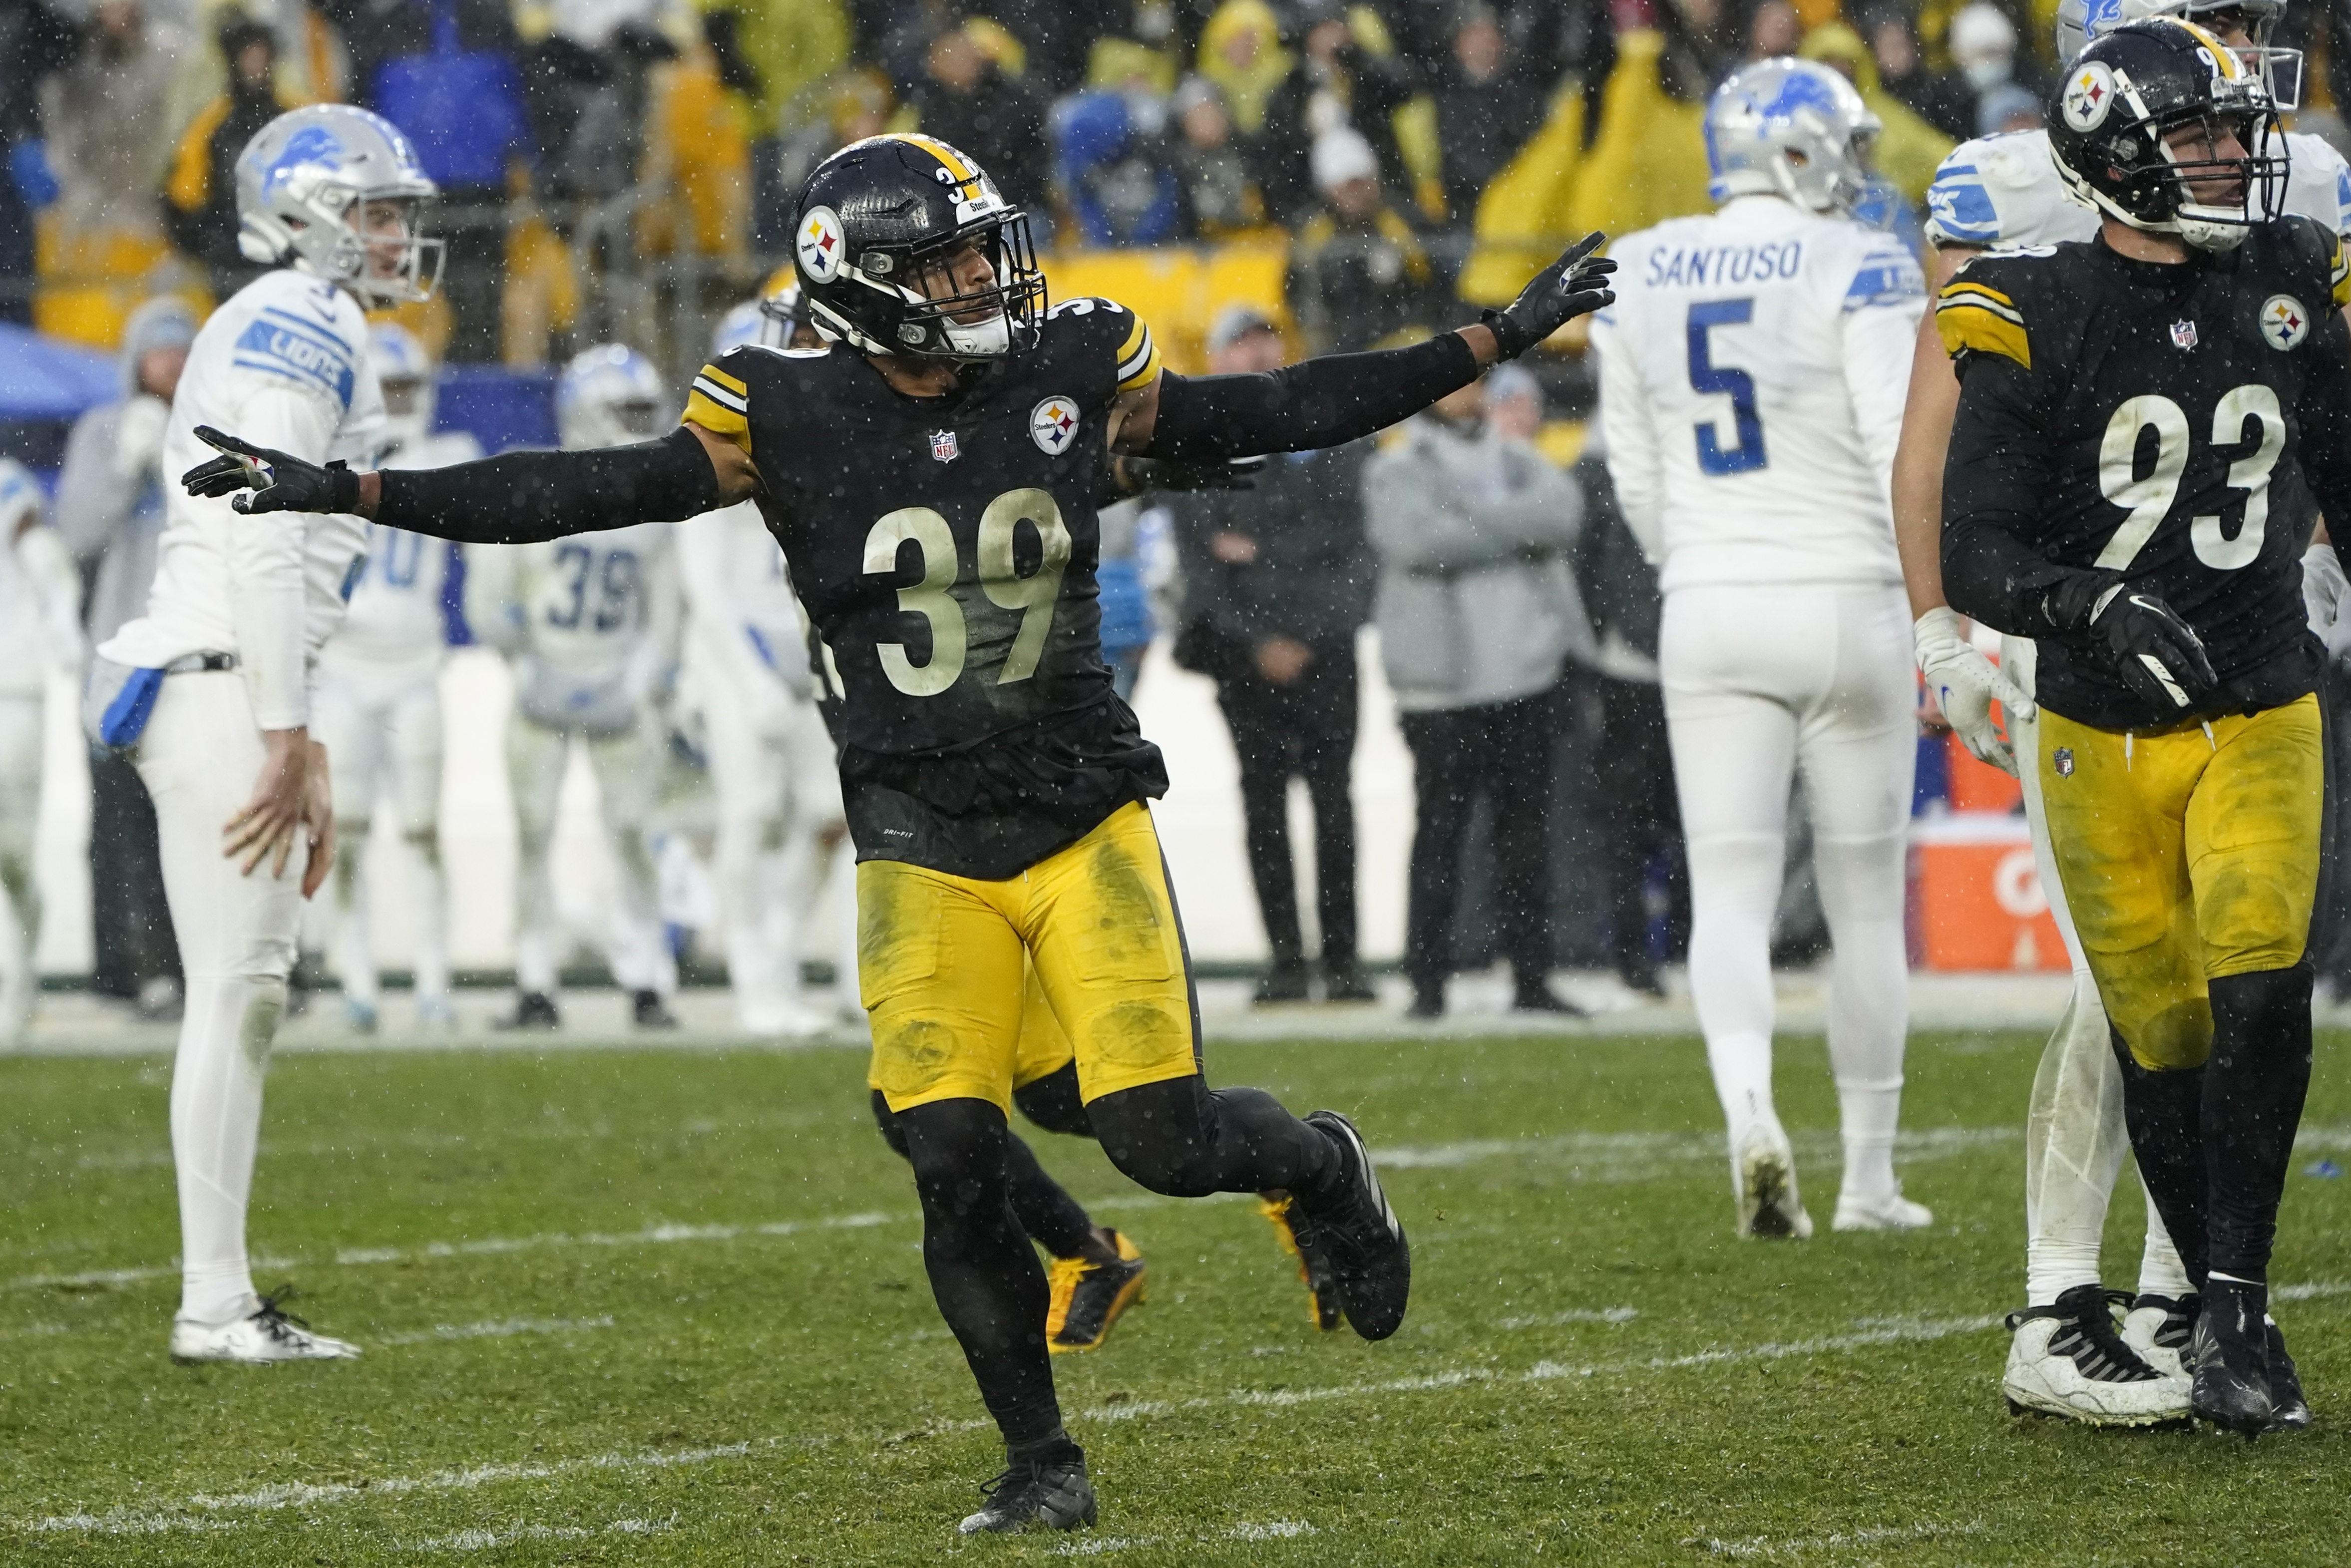 Steelers 37, Lions 27: Roethlisberger ends tough week with win